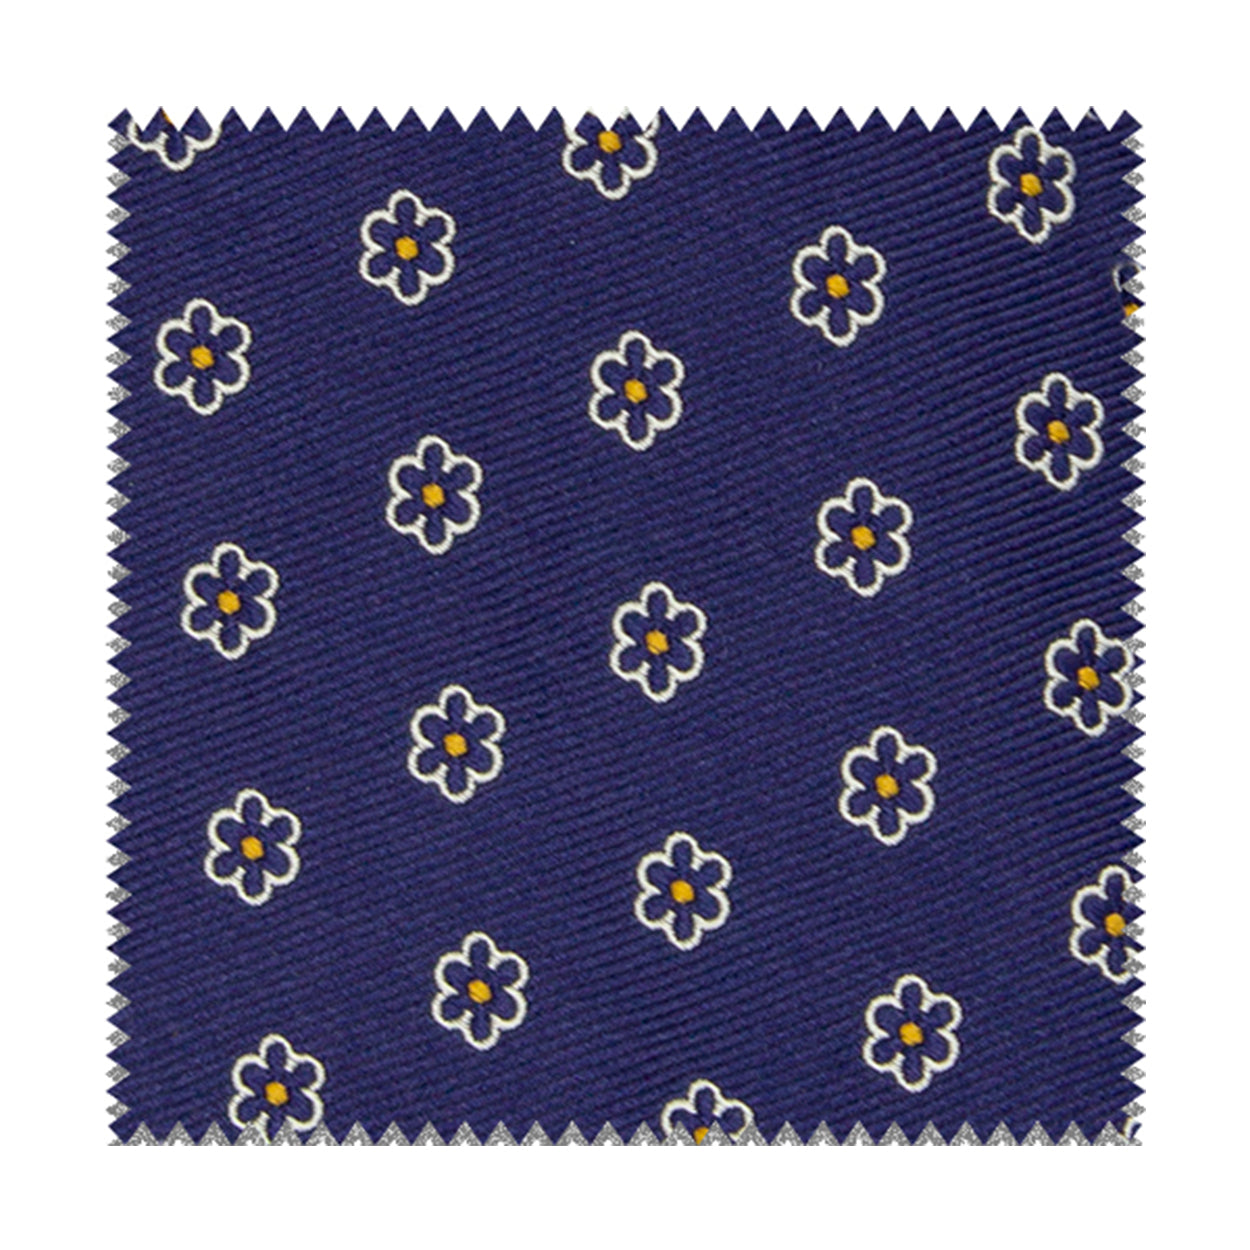 Blue fabric with blue flowers and yellow dots